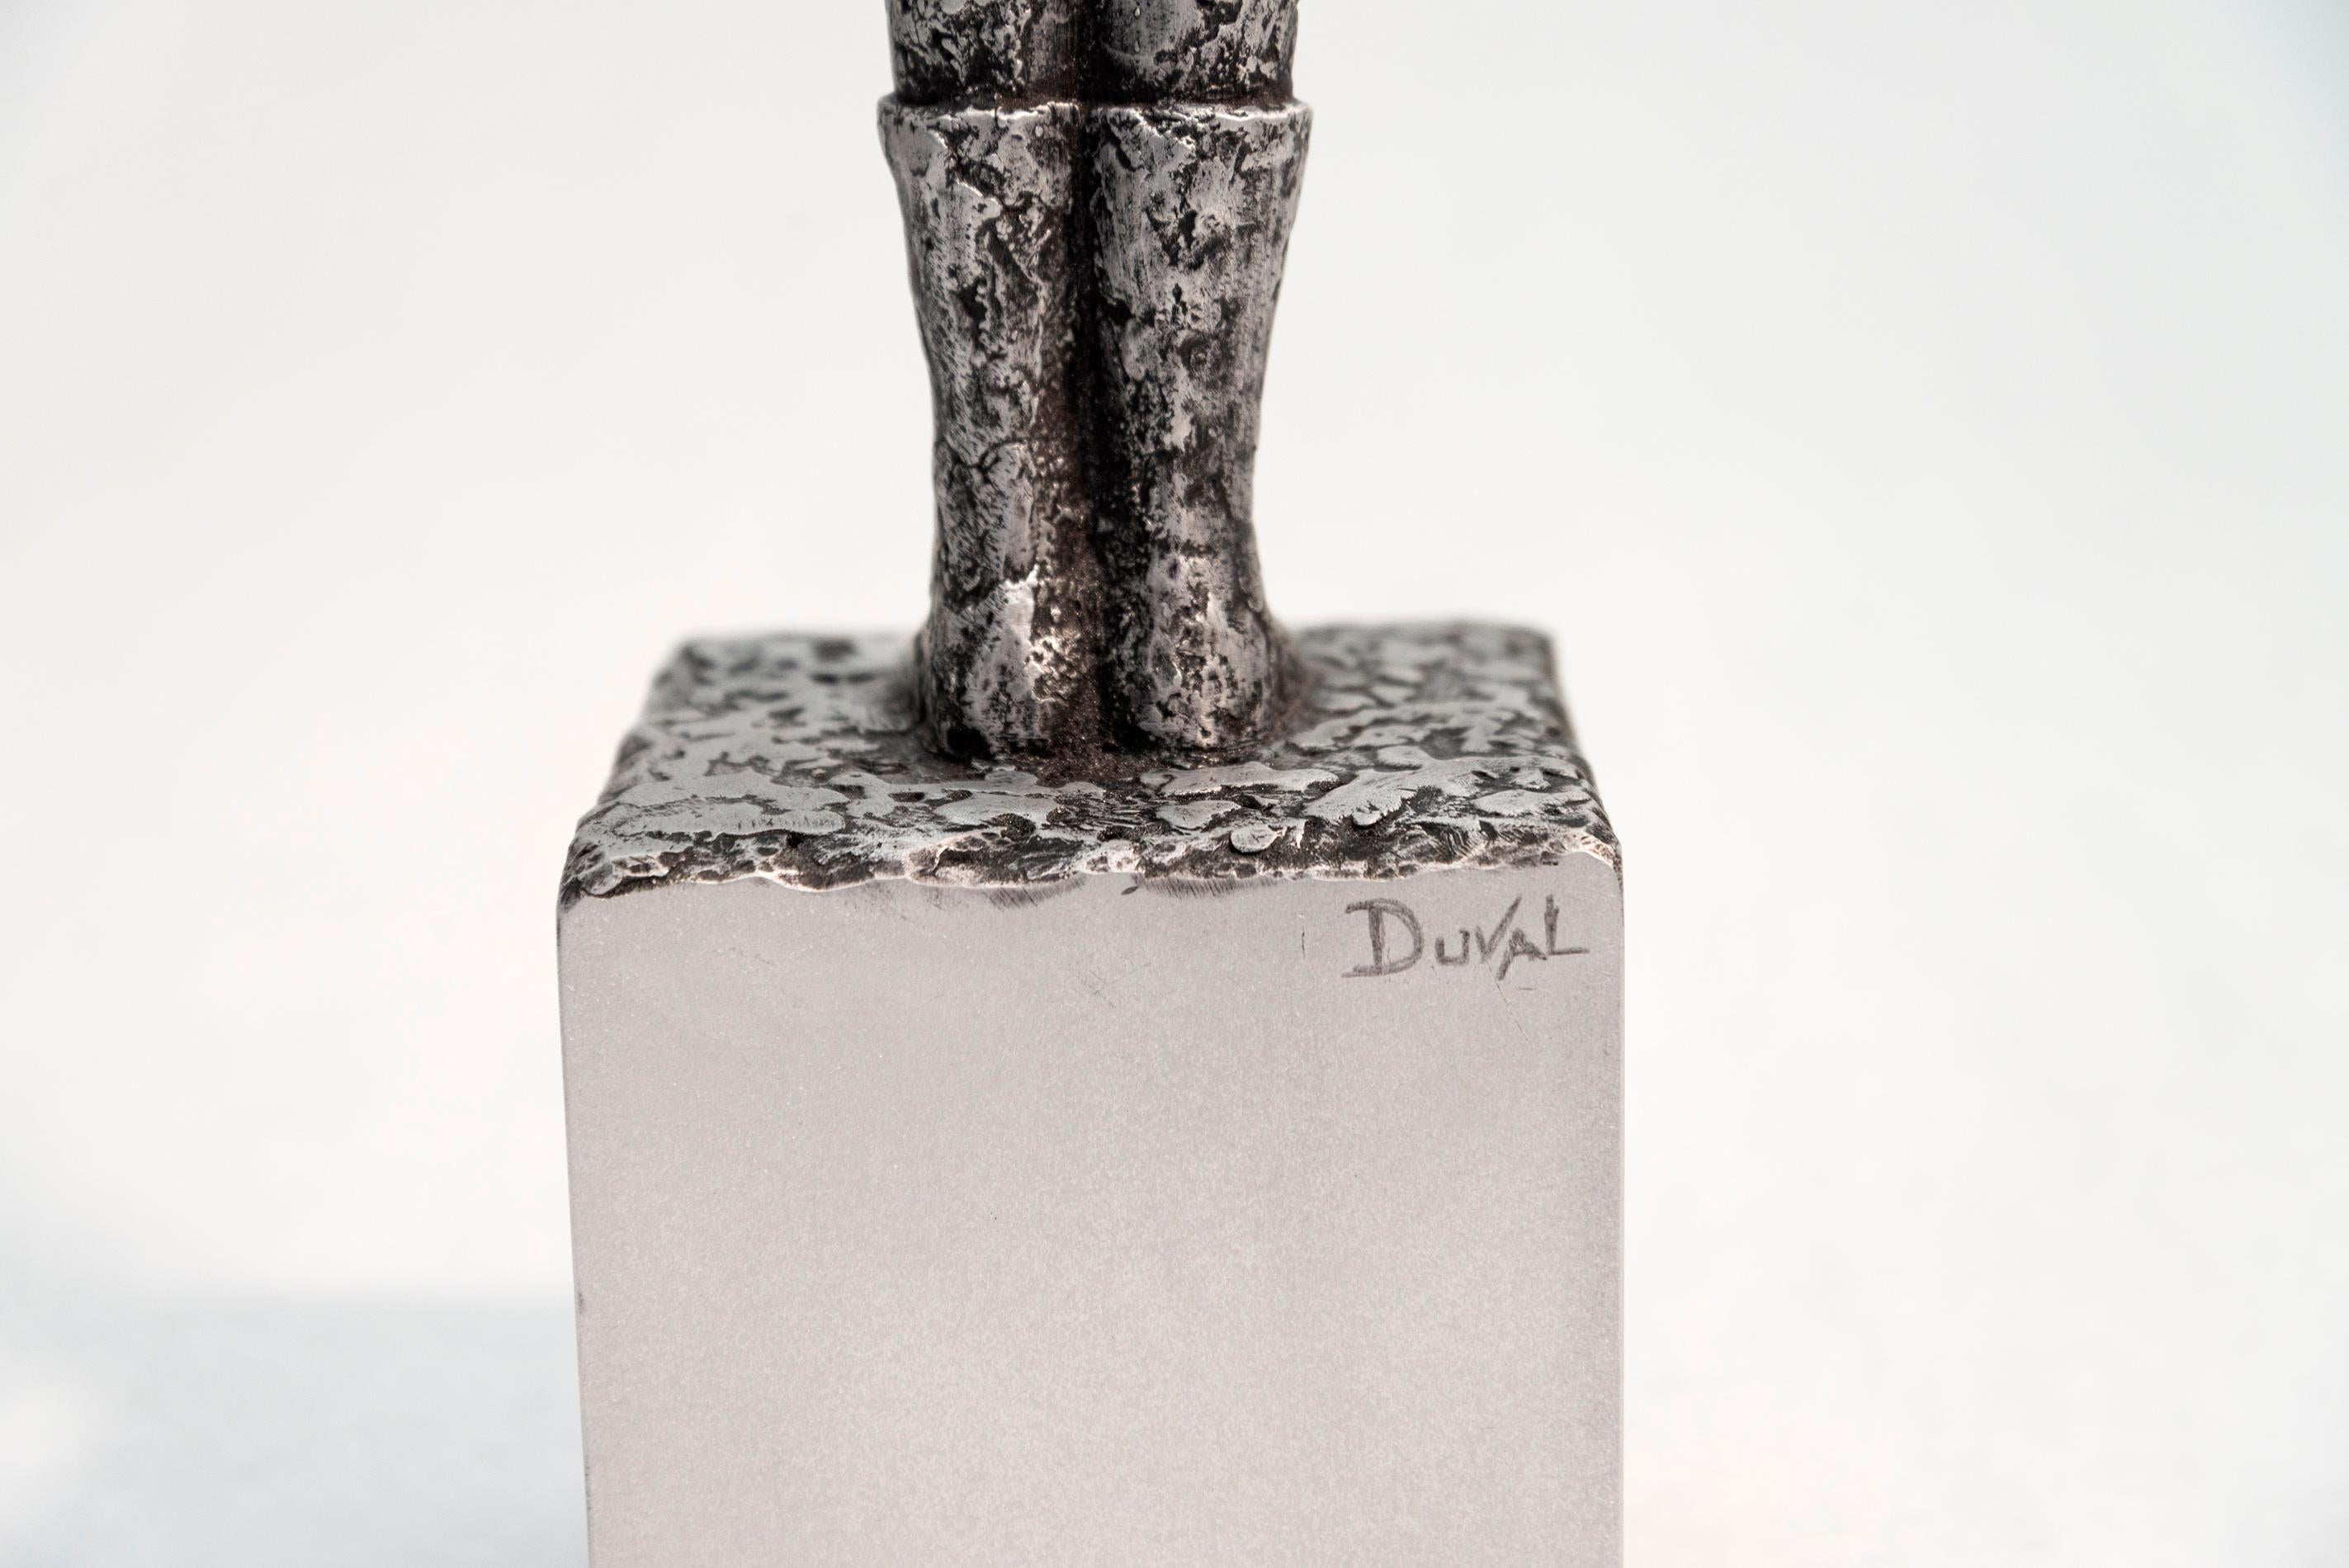 The Big Shy One - expressive, textured, male figurative, cast aluminum sculpture - Contemporary Sculpture by Paul Duval